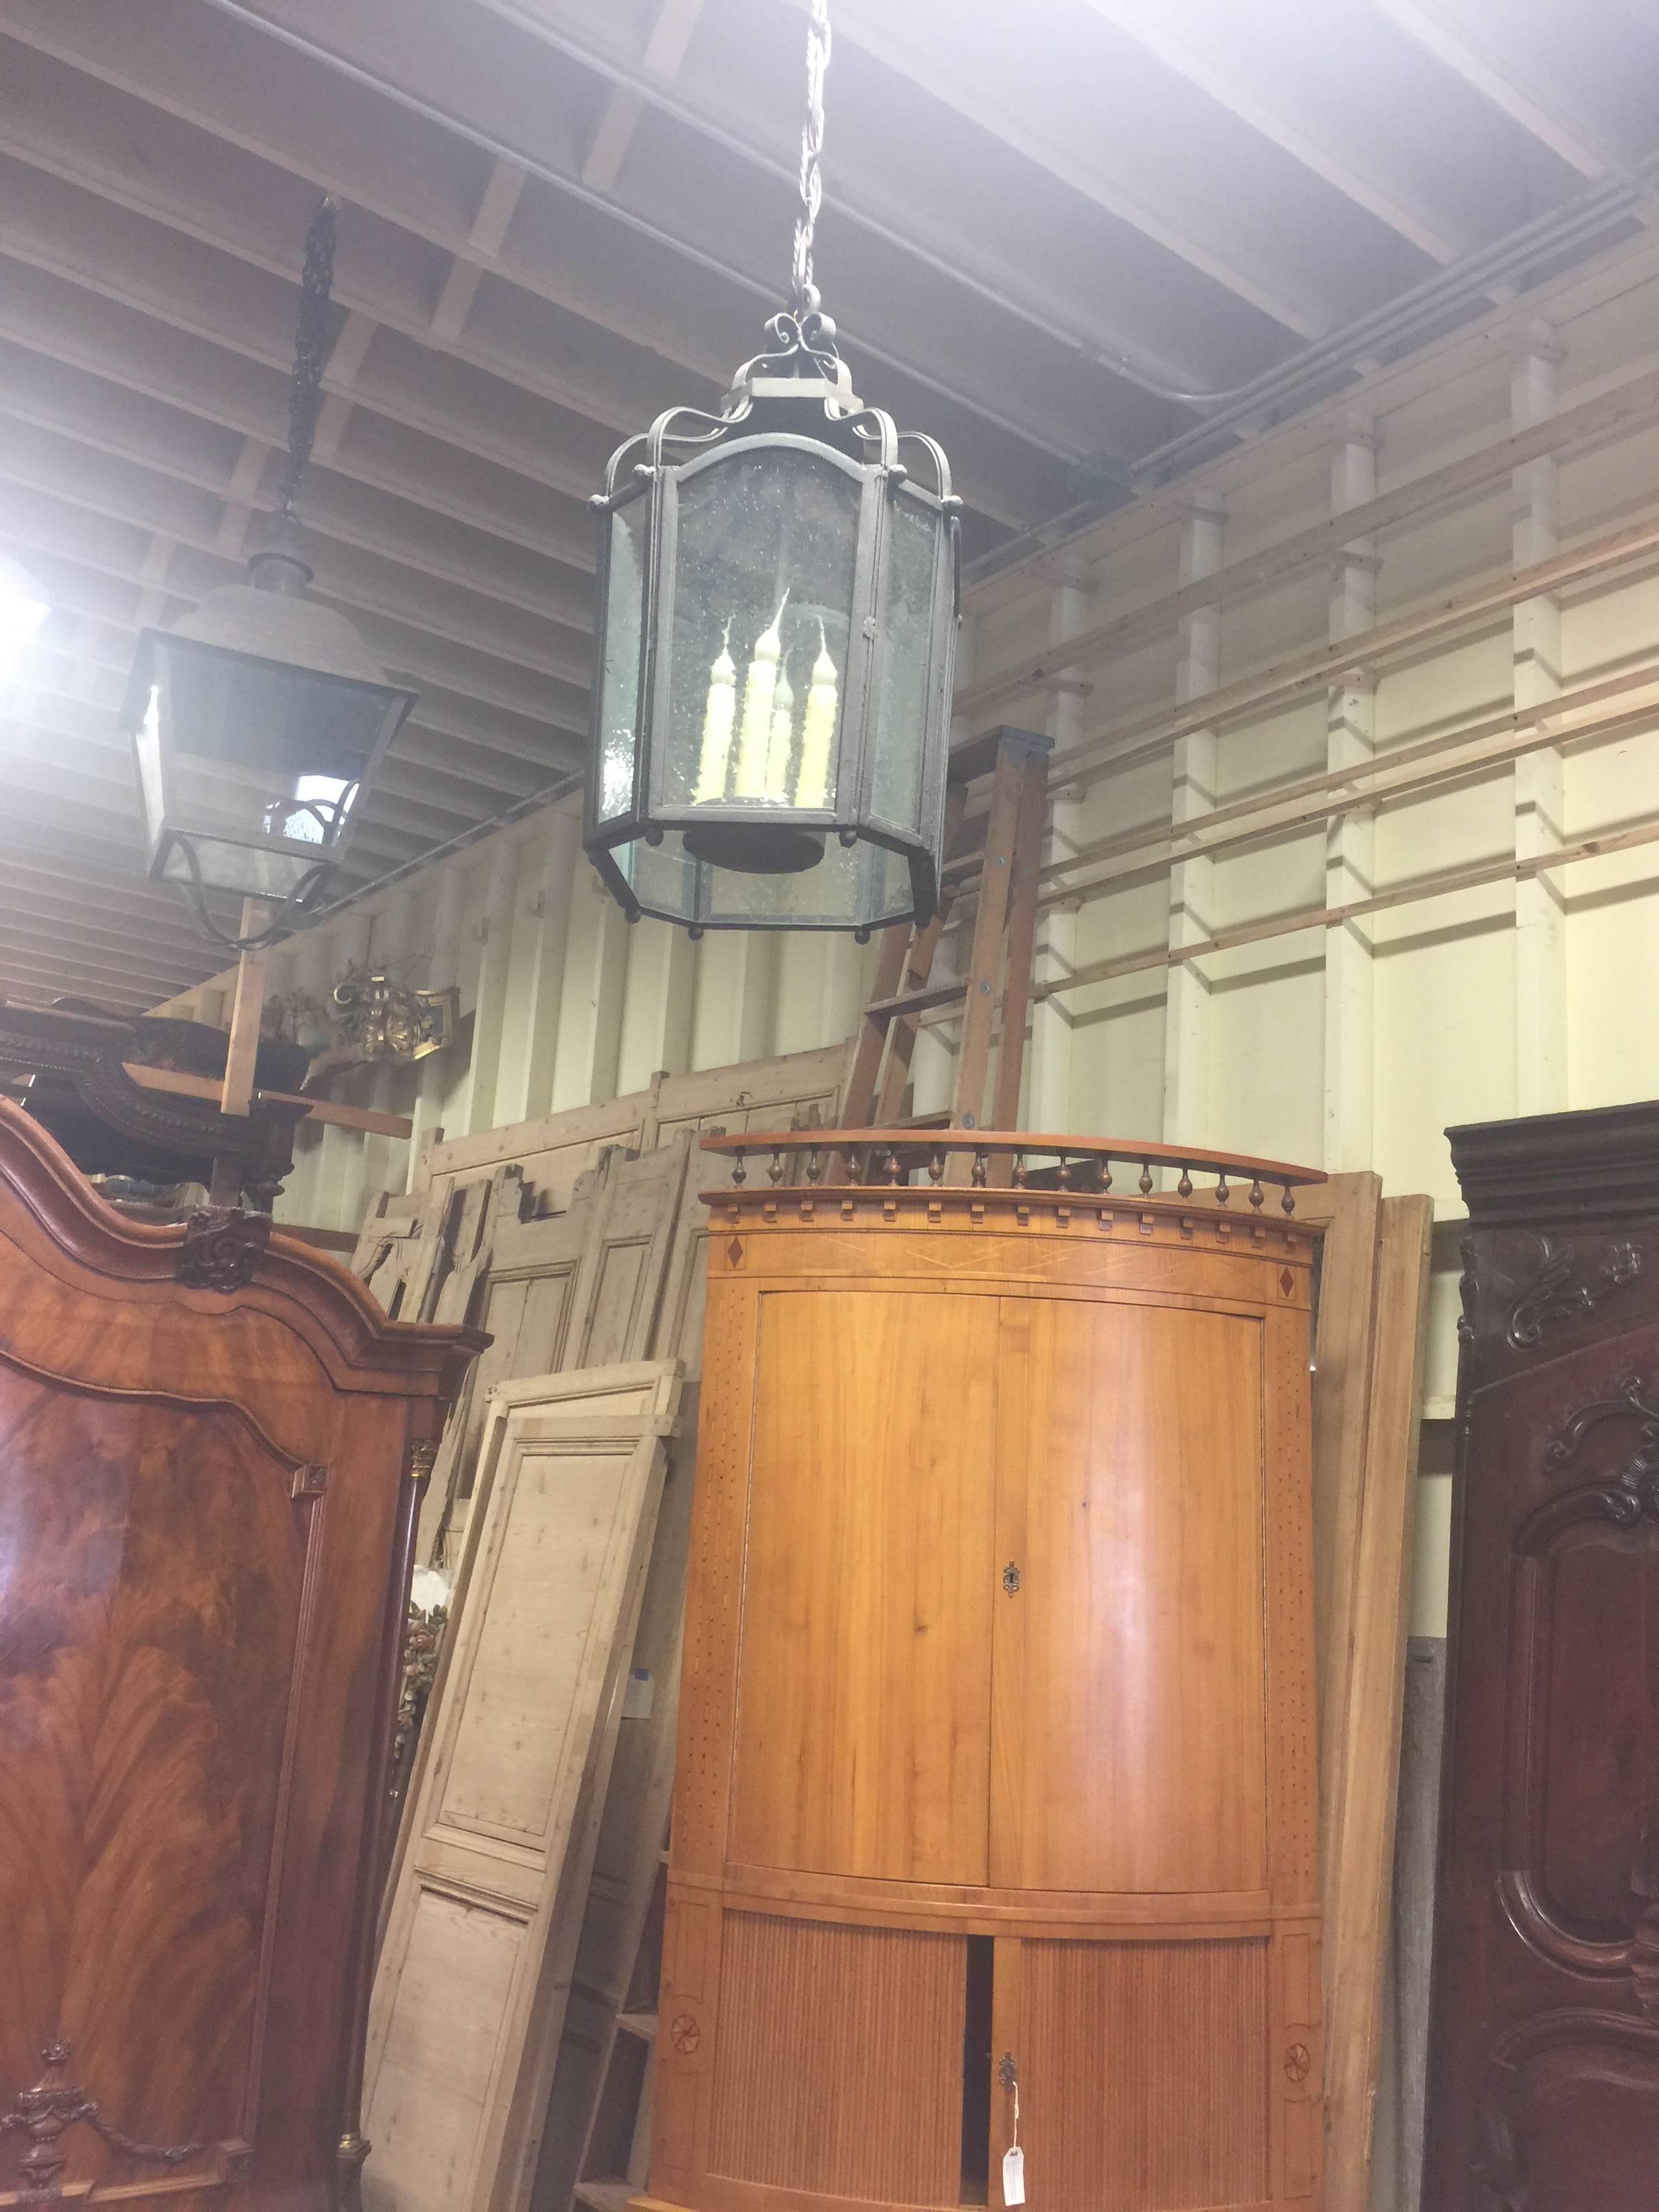 Reproduction Chandelier, four light lantern. Measures: 15''W x 29'' H.
UL approved.